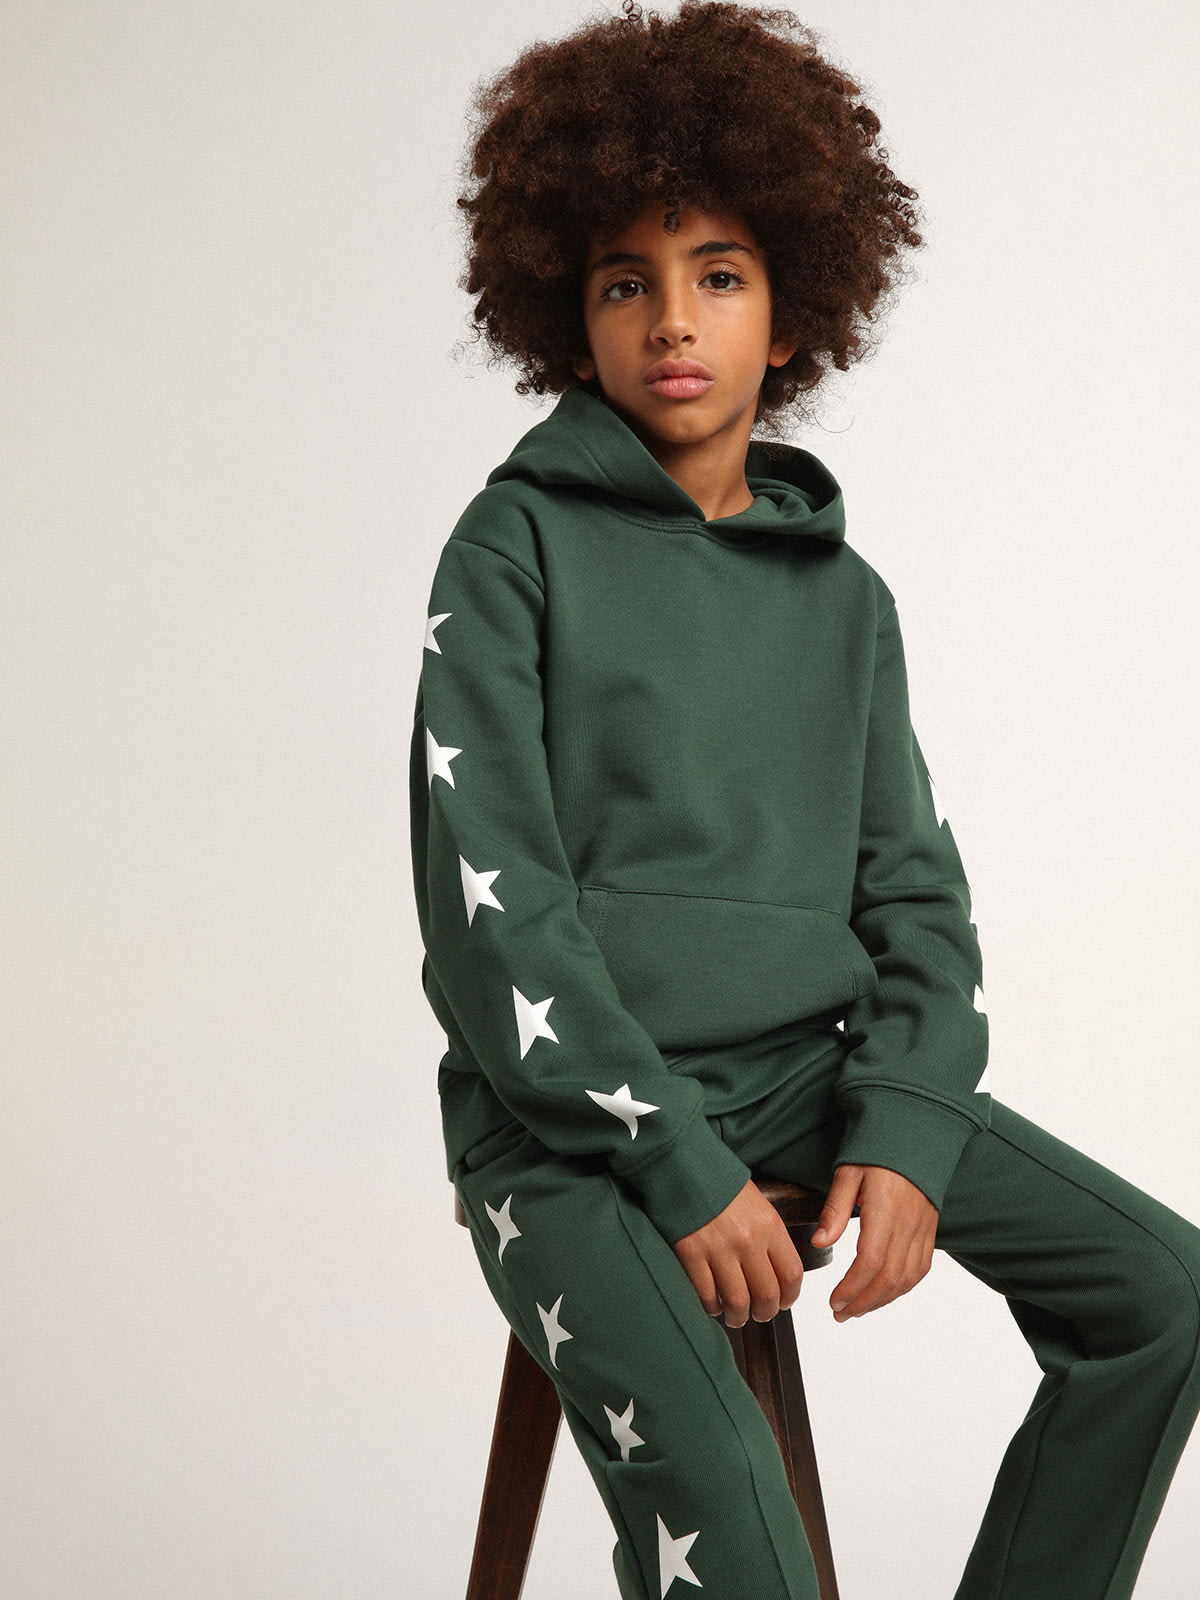 Golden Goose - Bright-green Star Collection hooded sweatshirt with contrasting white stars in 